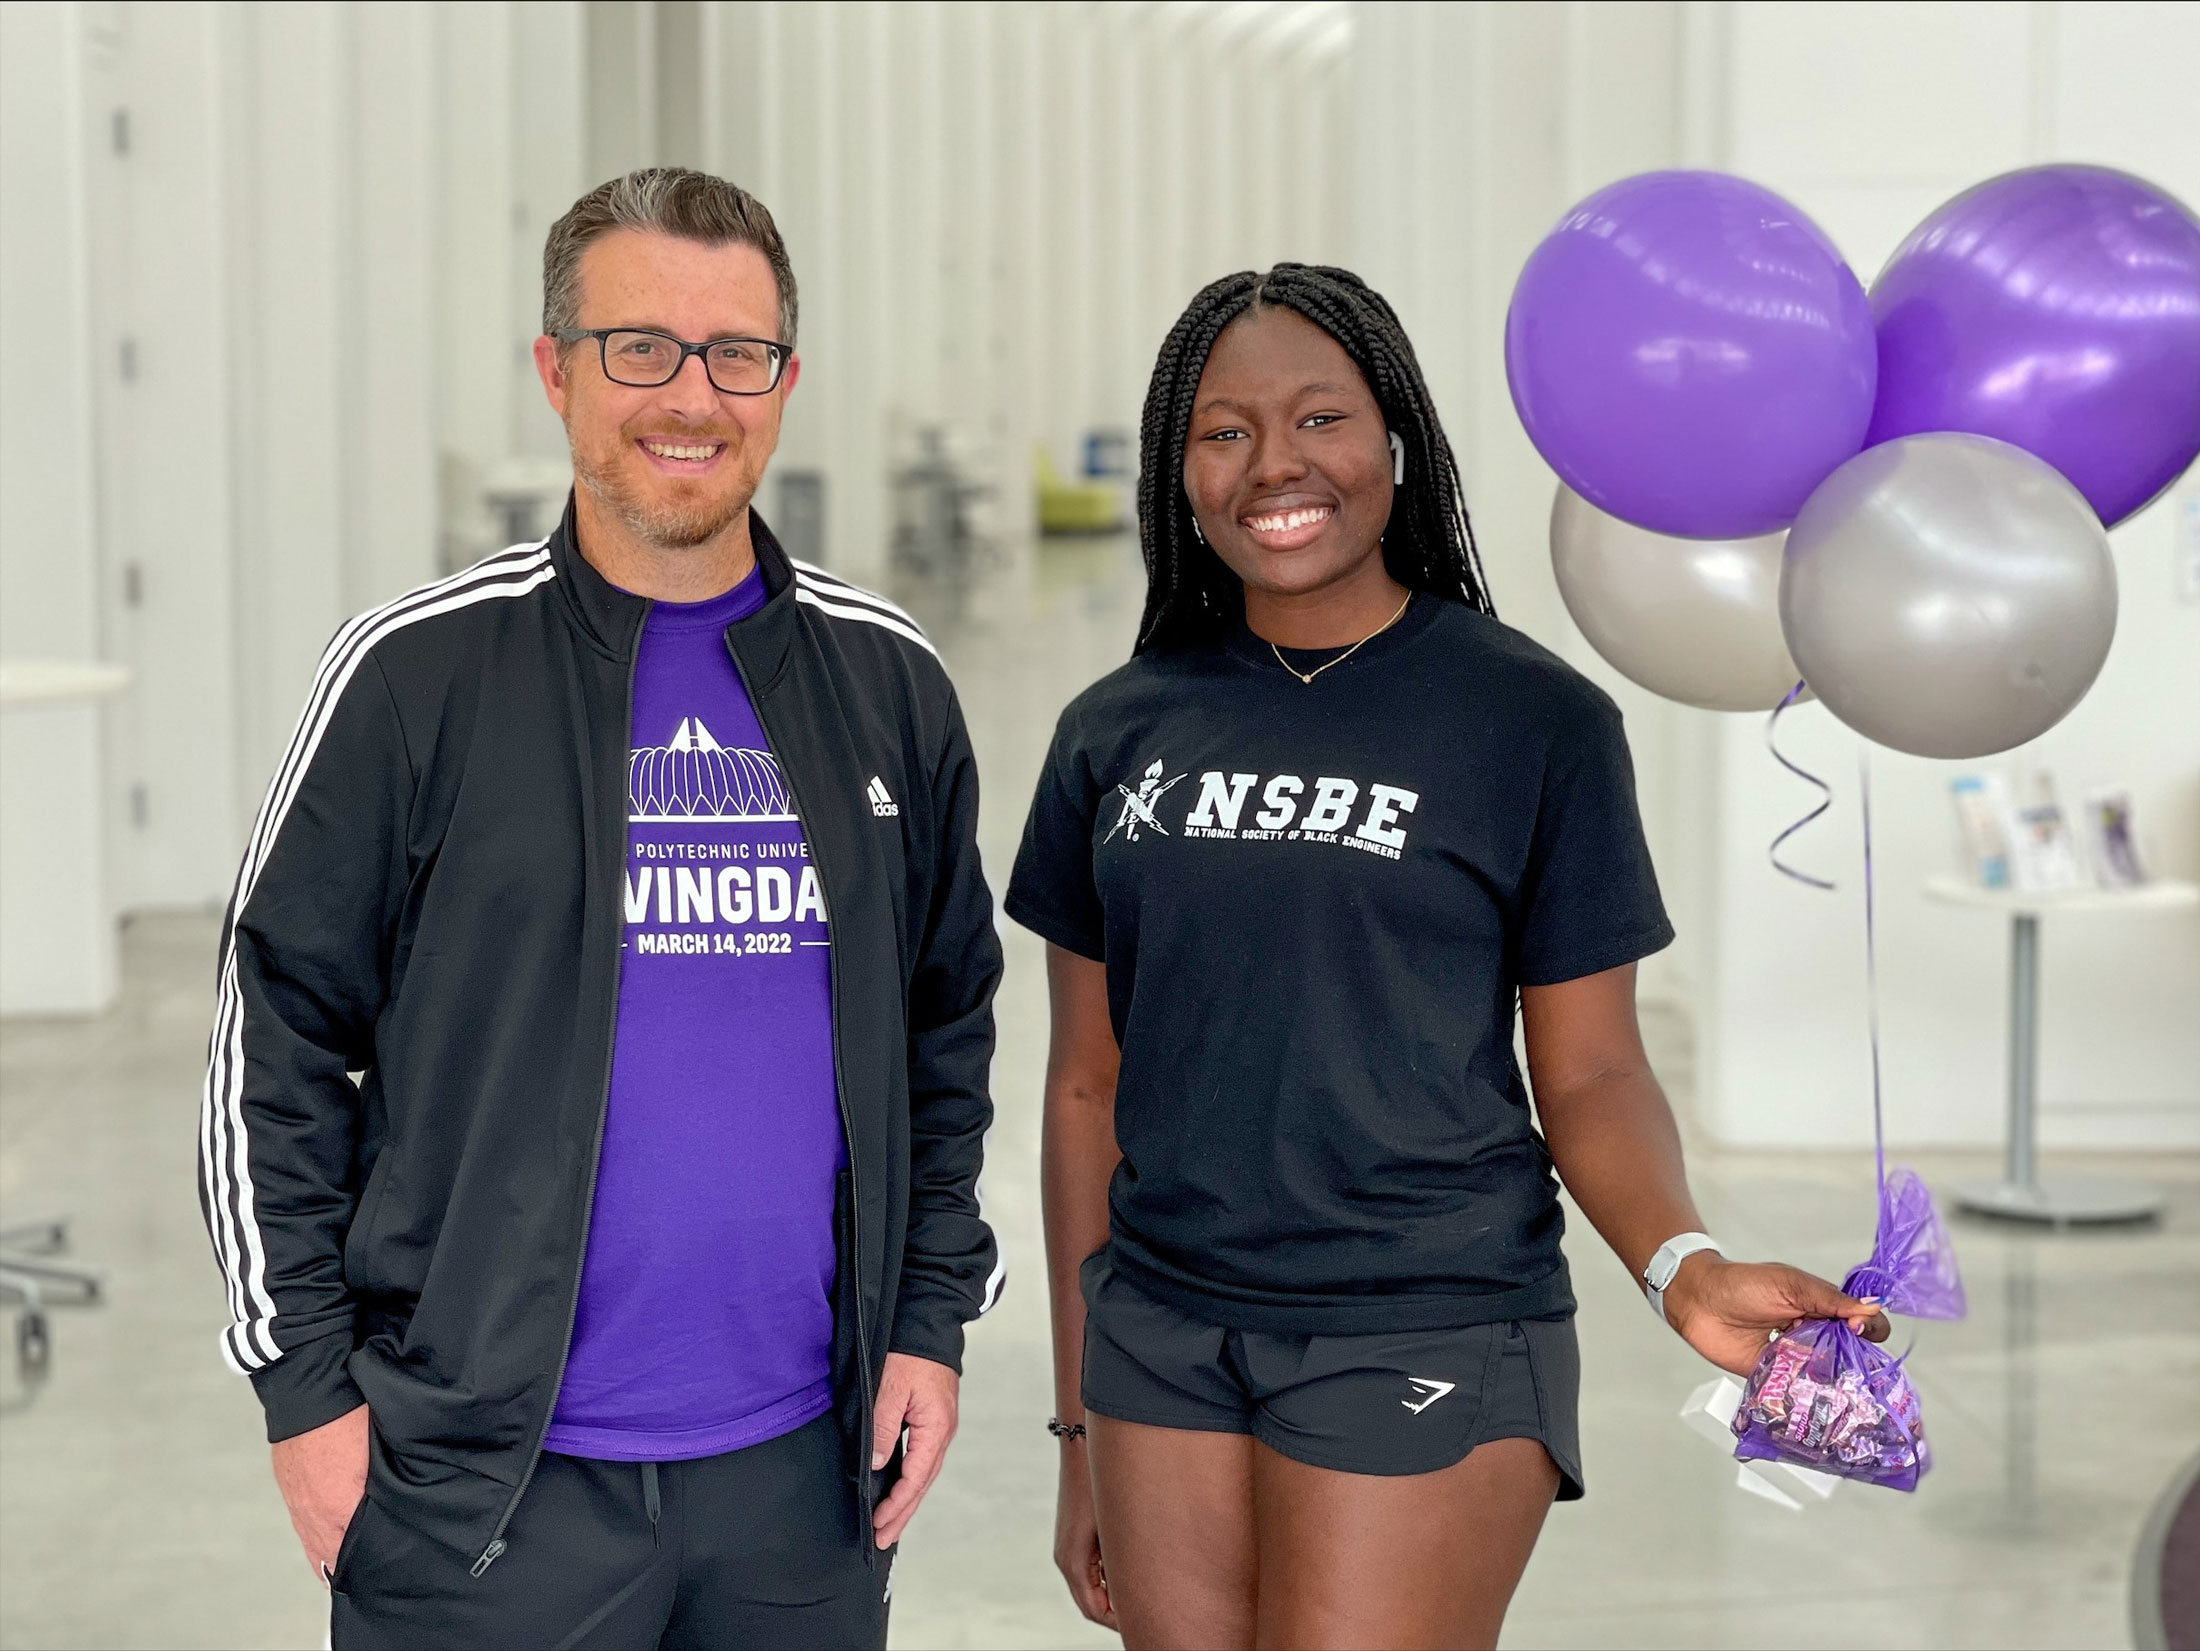 Jake Morrow, Florida Polytechnic University’s director of annual giving programs and alumni relations, and Catherine Abraham, National Society of Black Engineers president.